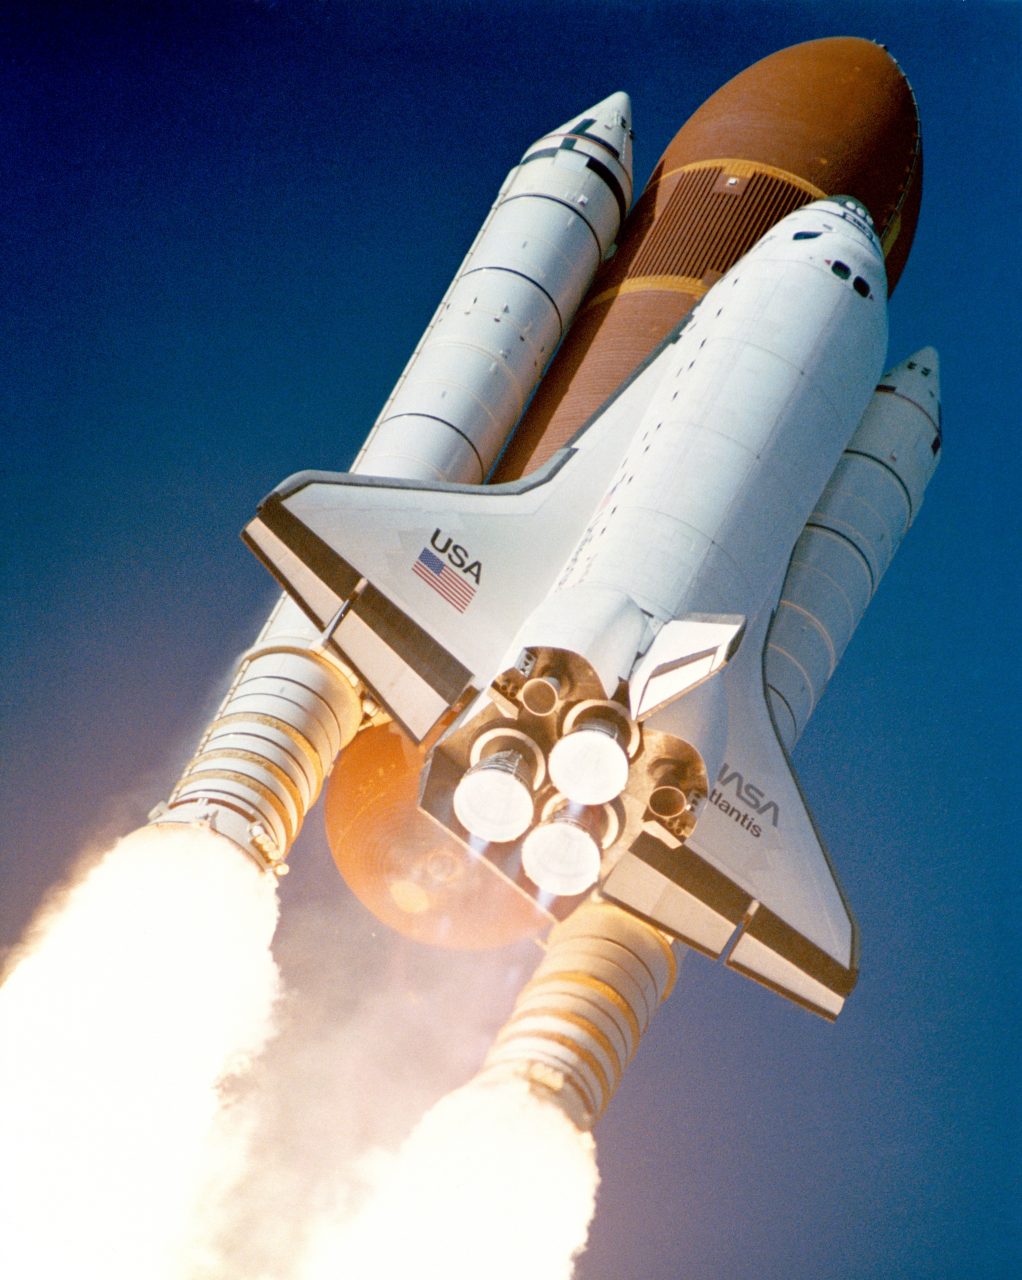 Space Shuttle during launch